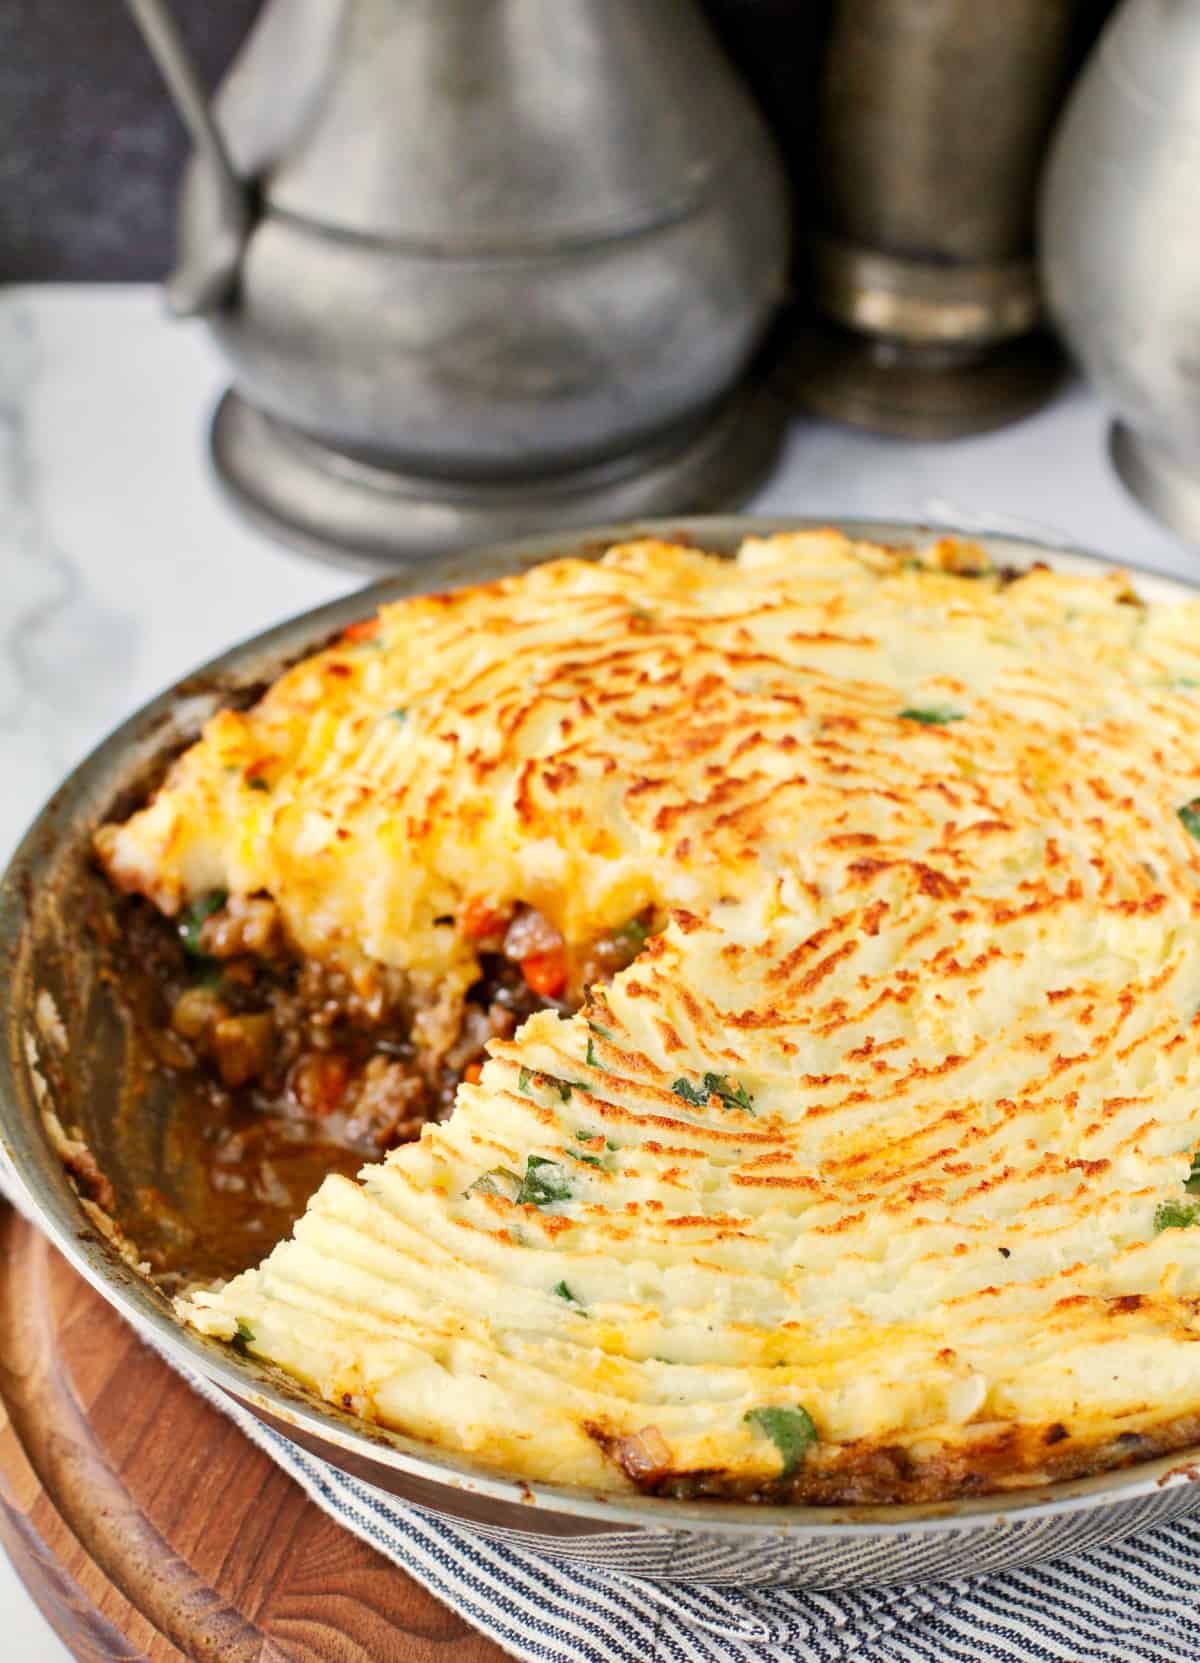 Shepherd's Pie in the pan with a slice removed.